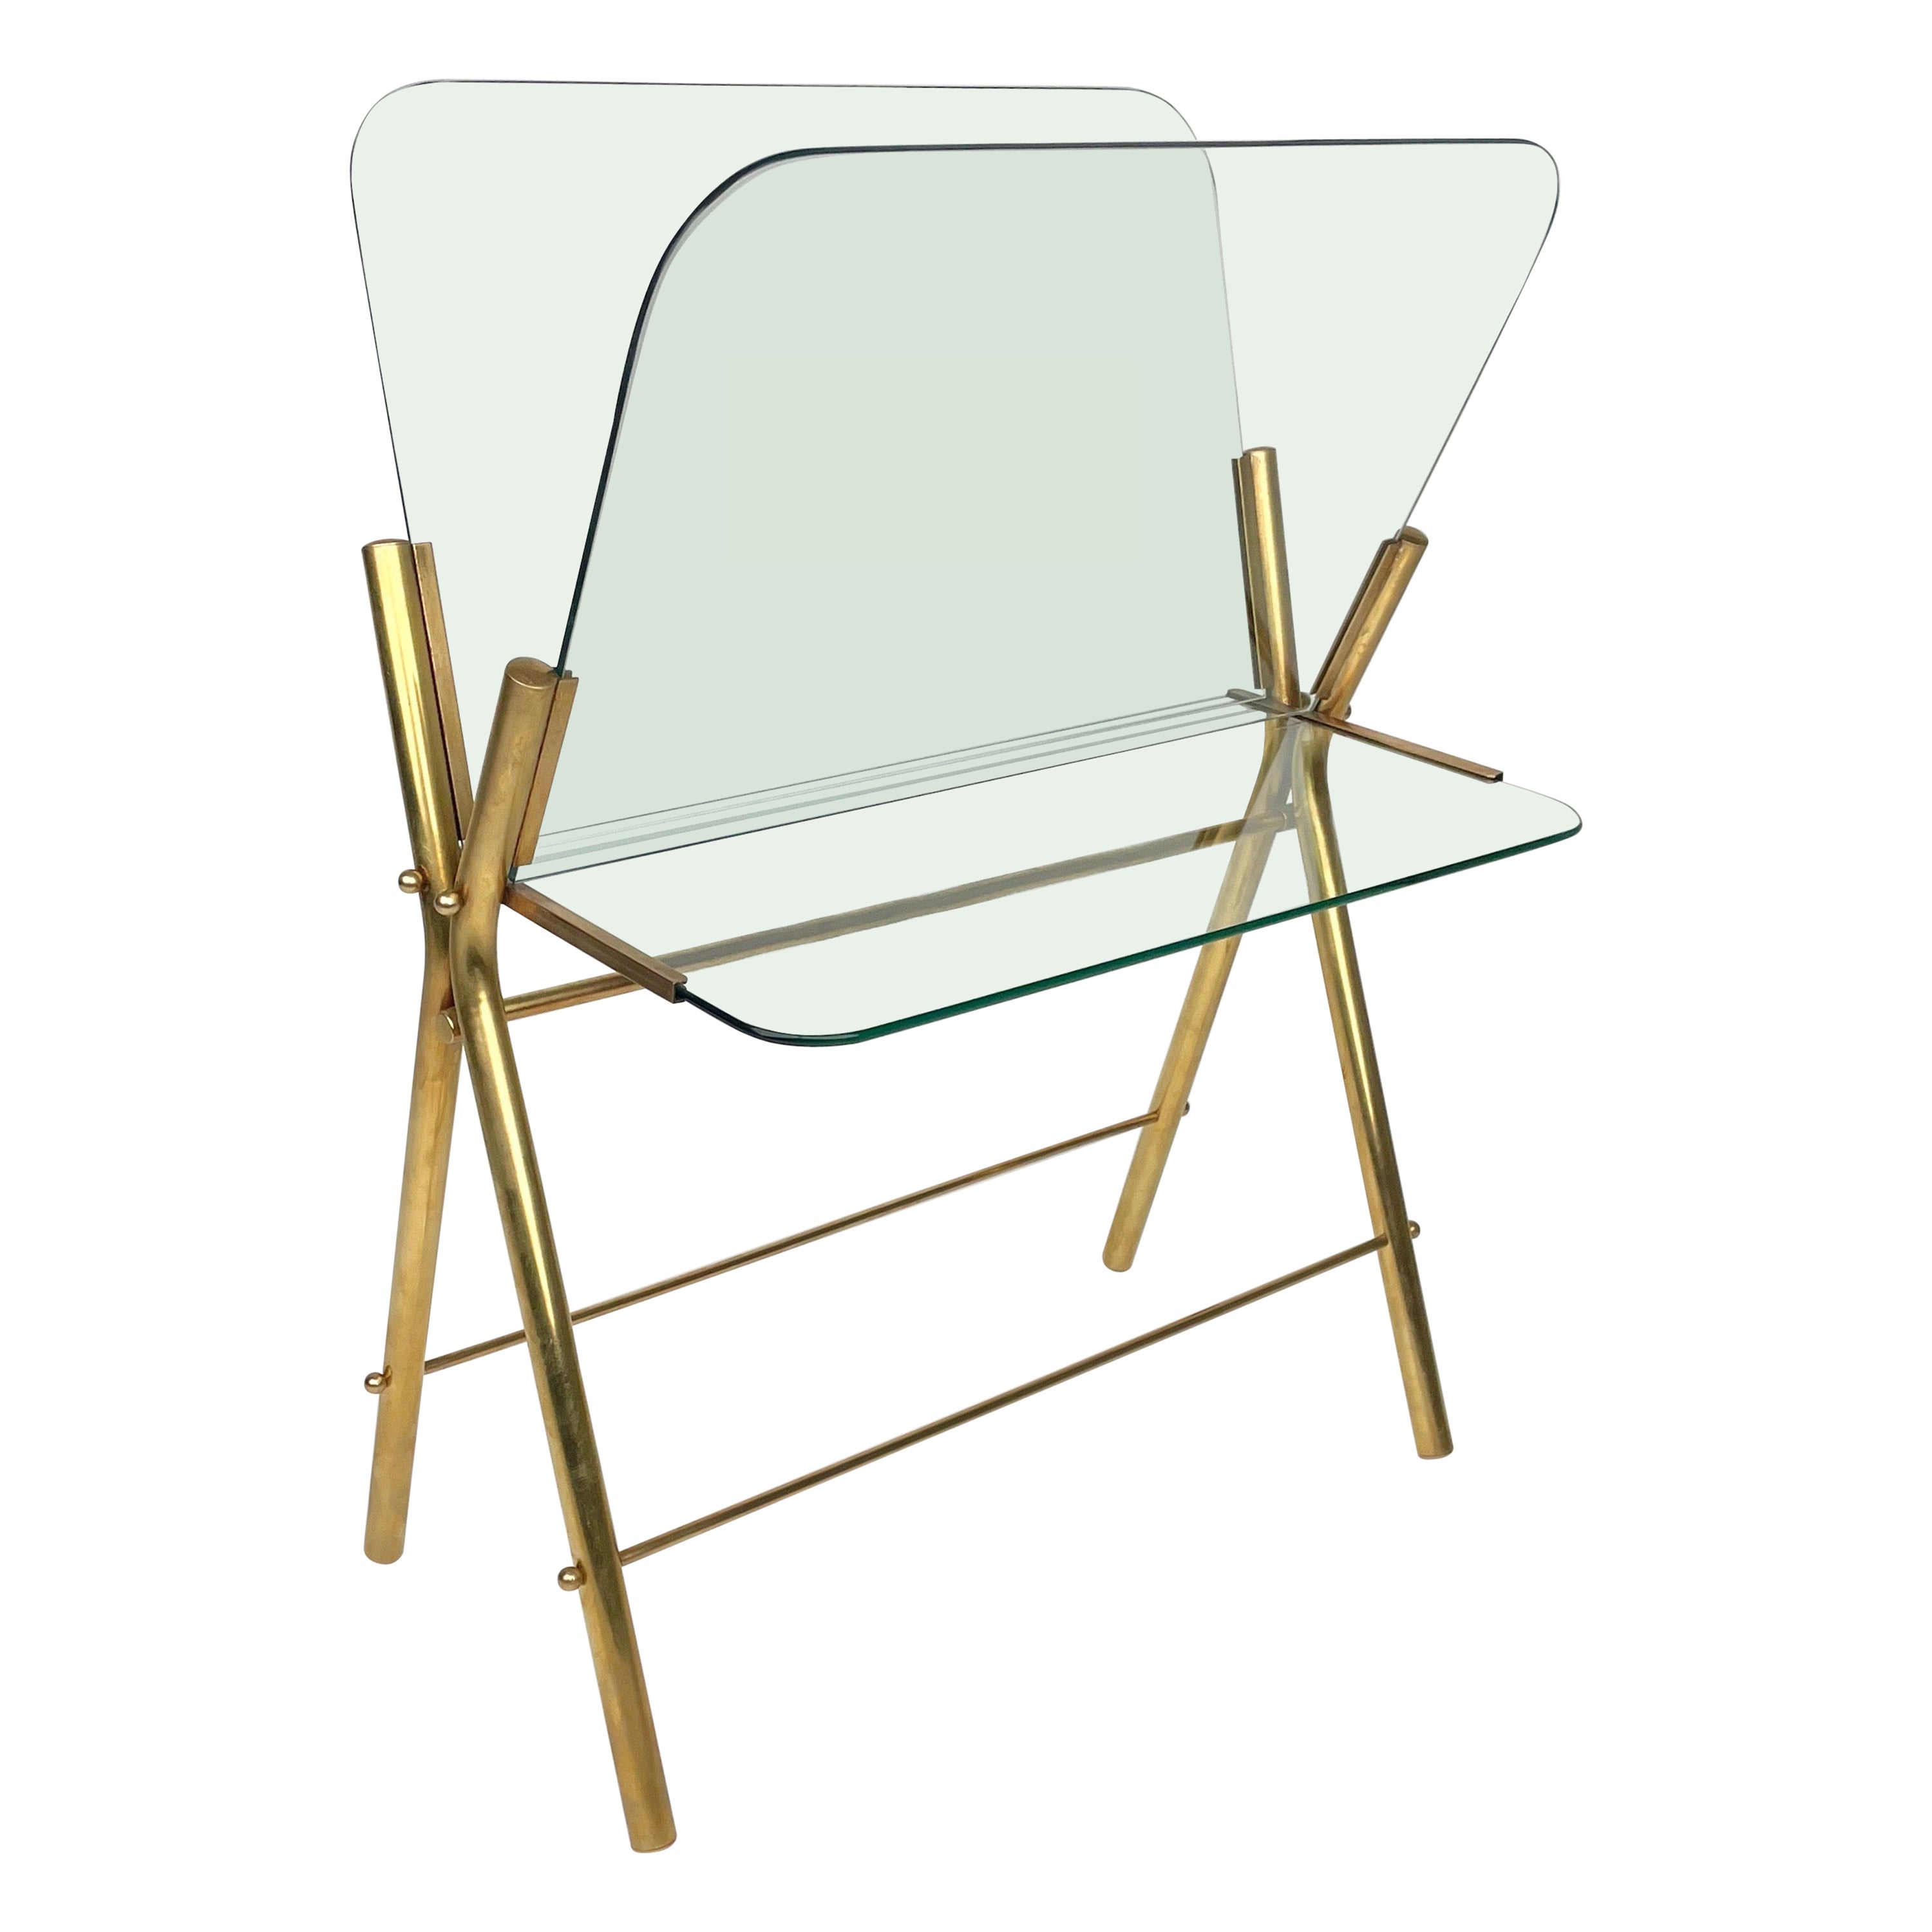 Magazine Rack Table Brass and Glass, Italy 1950s For Sale